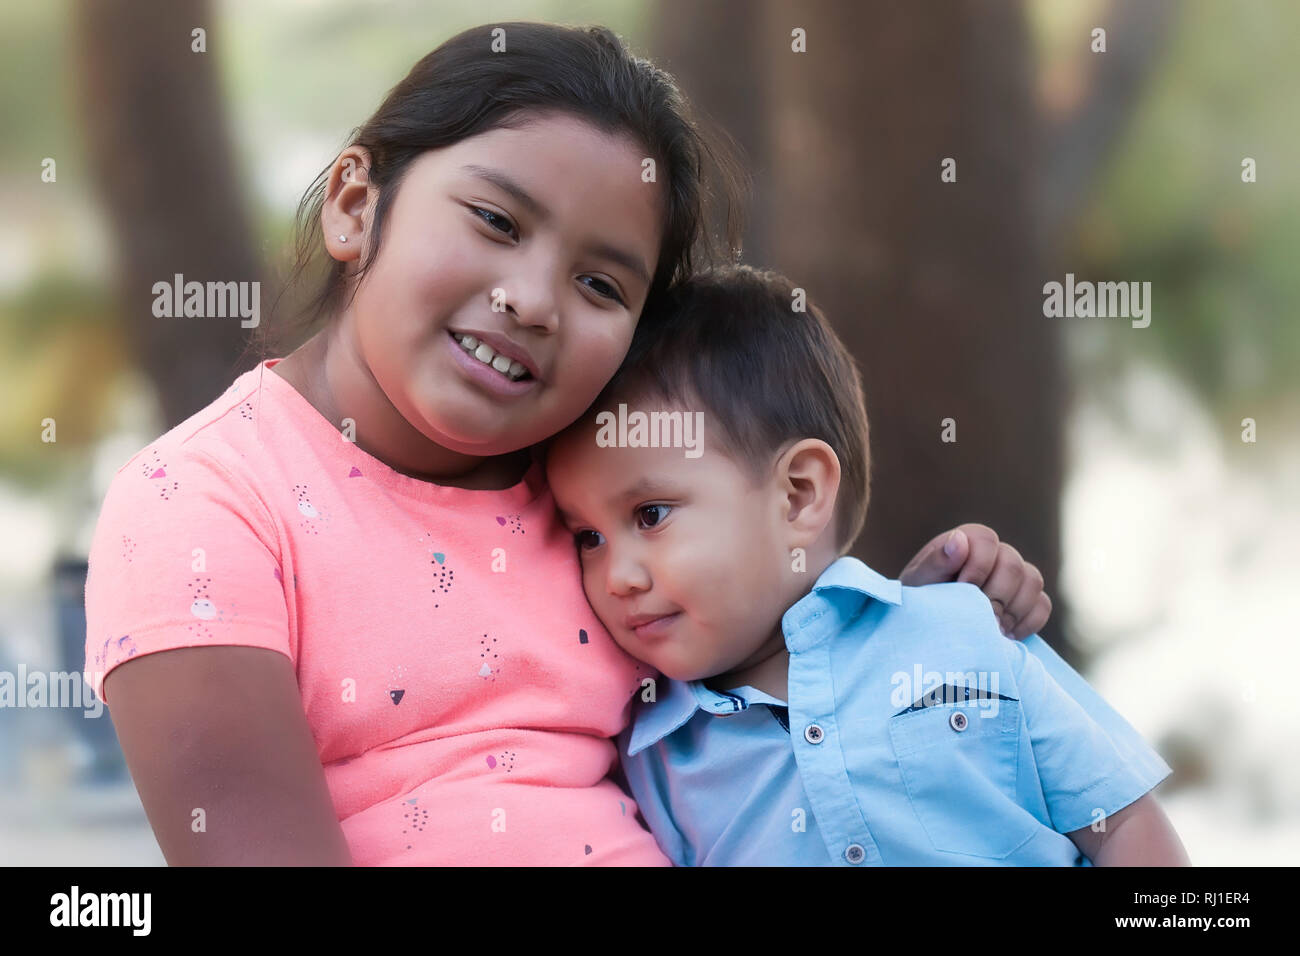 A young girl hugging a little boy and trying to encourage him while he looks upset, sad or depressed. Stock Photo